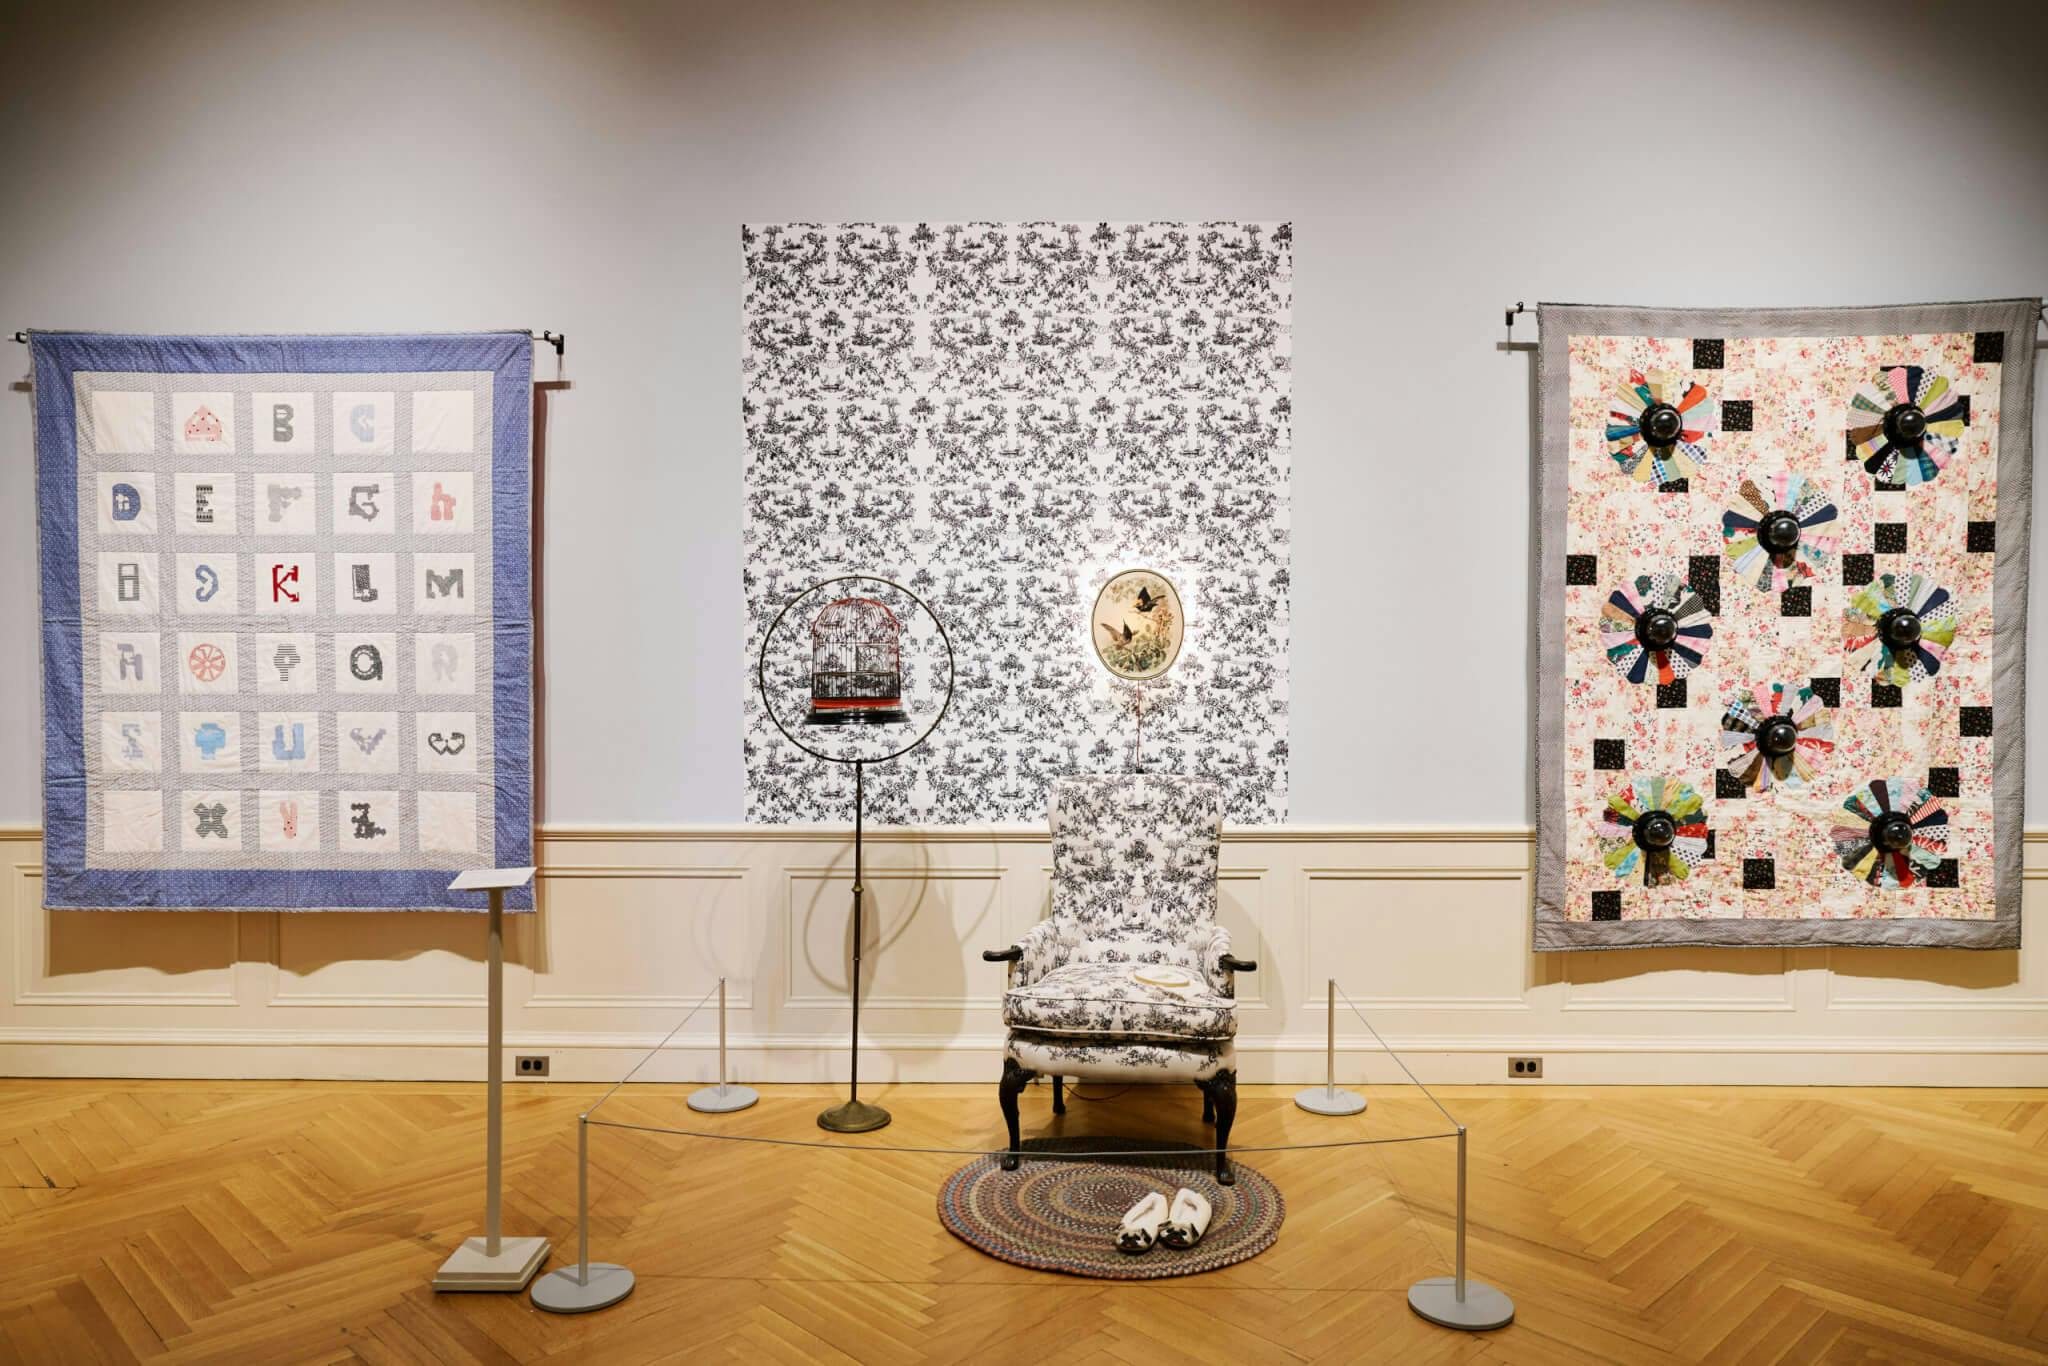 Installation view of "Social Fabric" at the Newport Art Museum